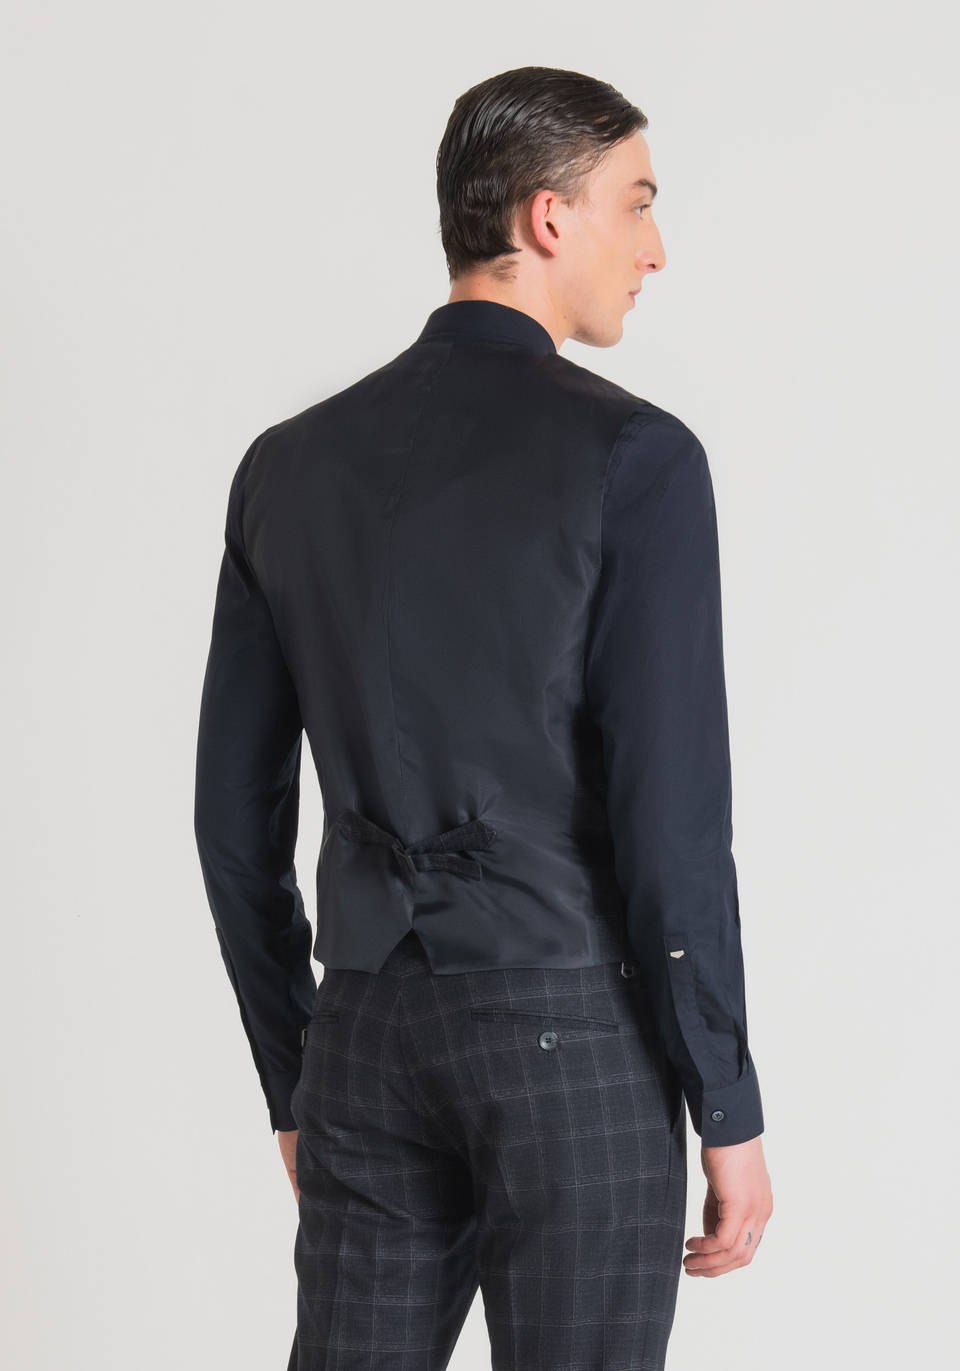 SLIM FIT WAISTCOAT IN STRETCH VISCOSE BLEND WITH CHECK PATTERN - Antony Morato Online Shop